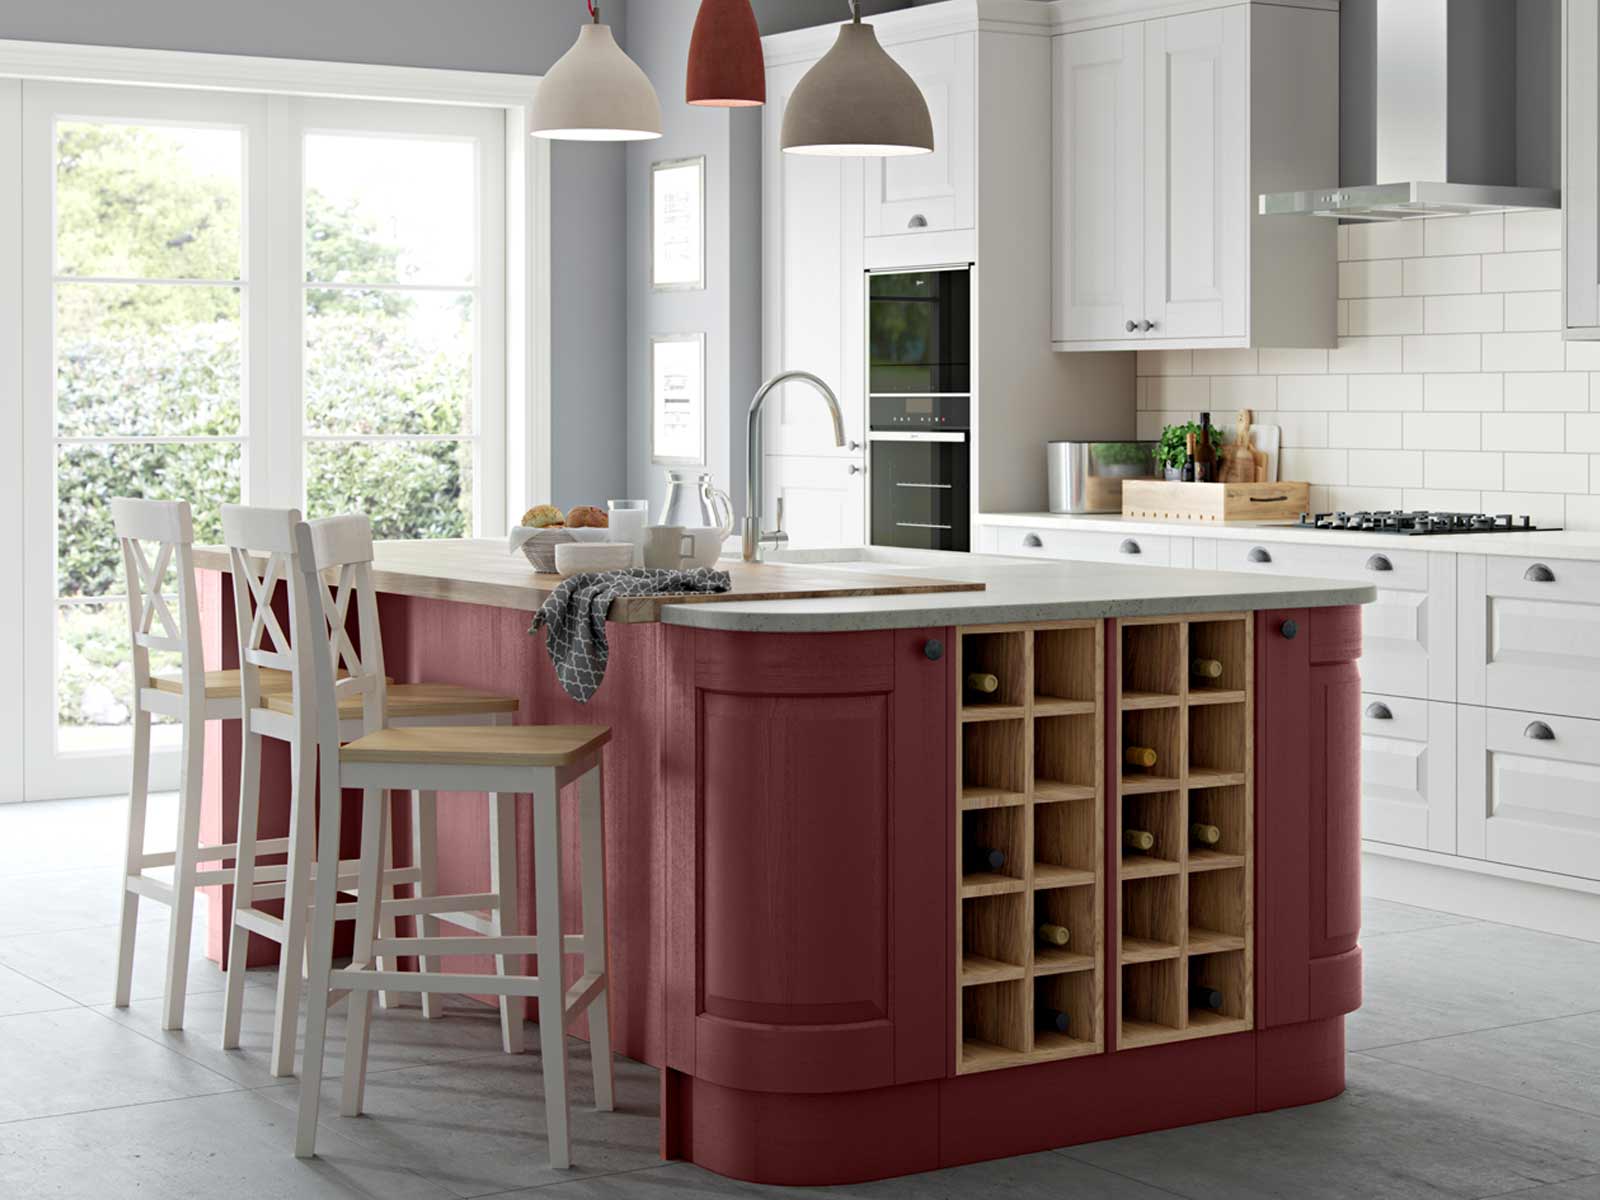 A perfect kitchen with curved doors and wine racks in a kitchen island